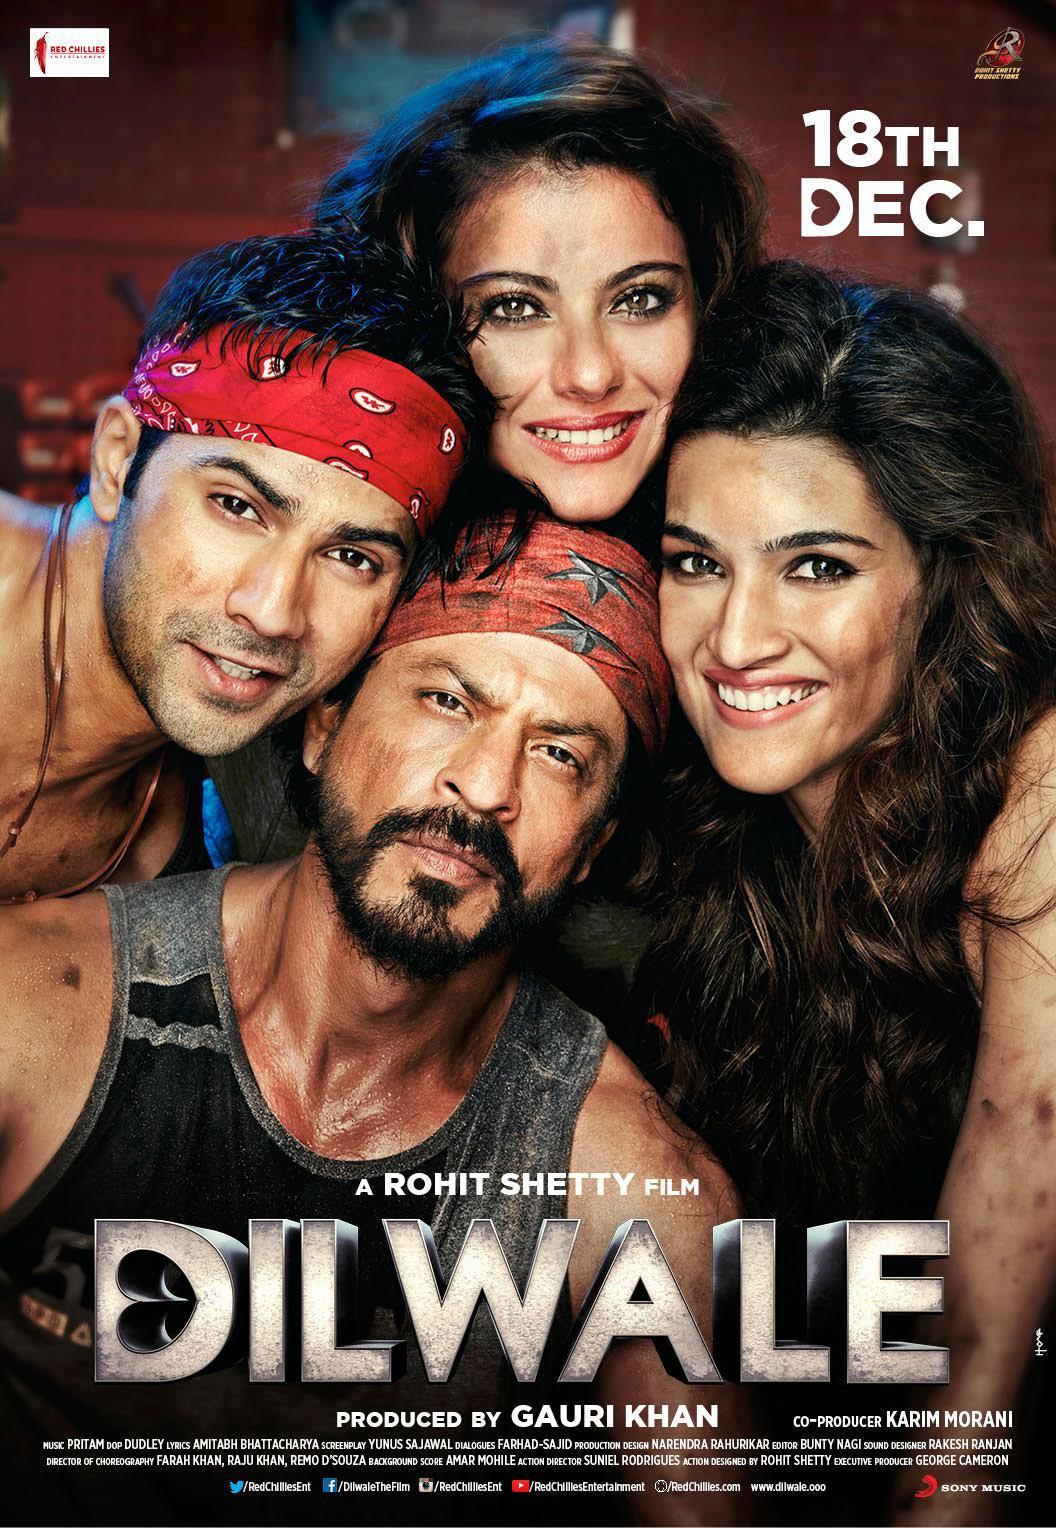 Dilwale (2015) presents Kriti Sanon alongside Shah Rukh Khan and Kajol in a delightful blend of romance, action, and comedy, directed by Rohit Shetty. It's a captivating tale of love entwined with family secrets and unexpected twists.